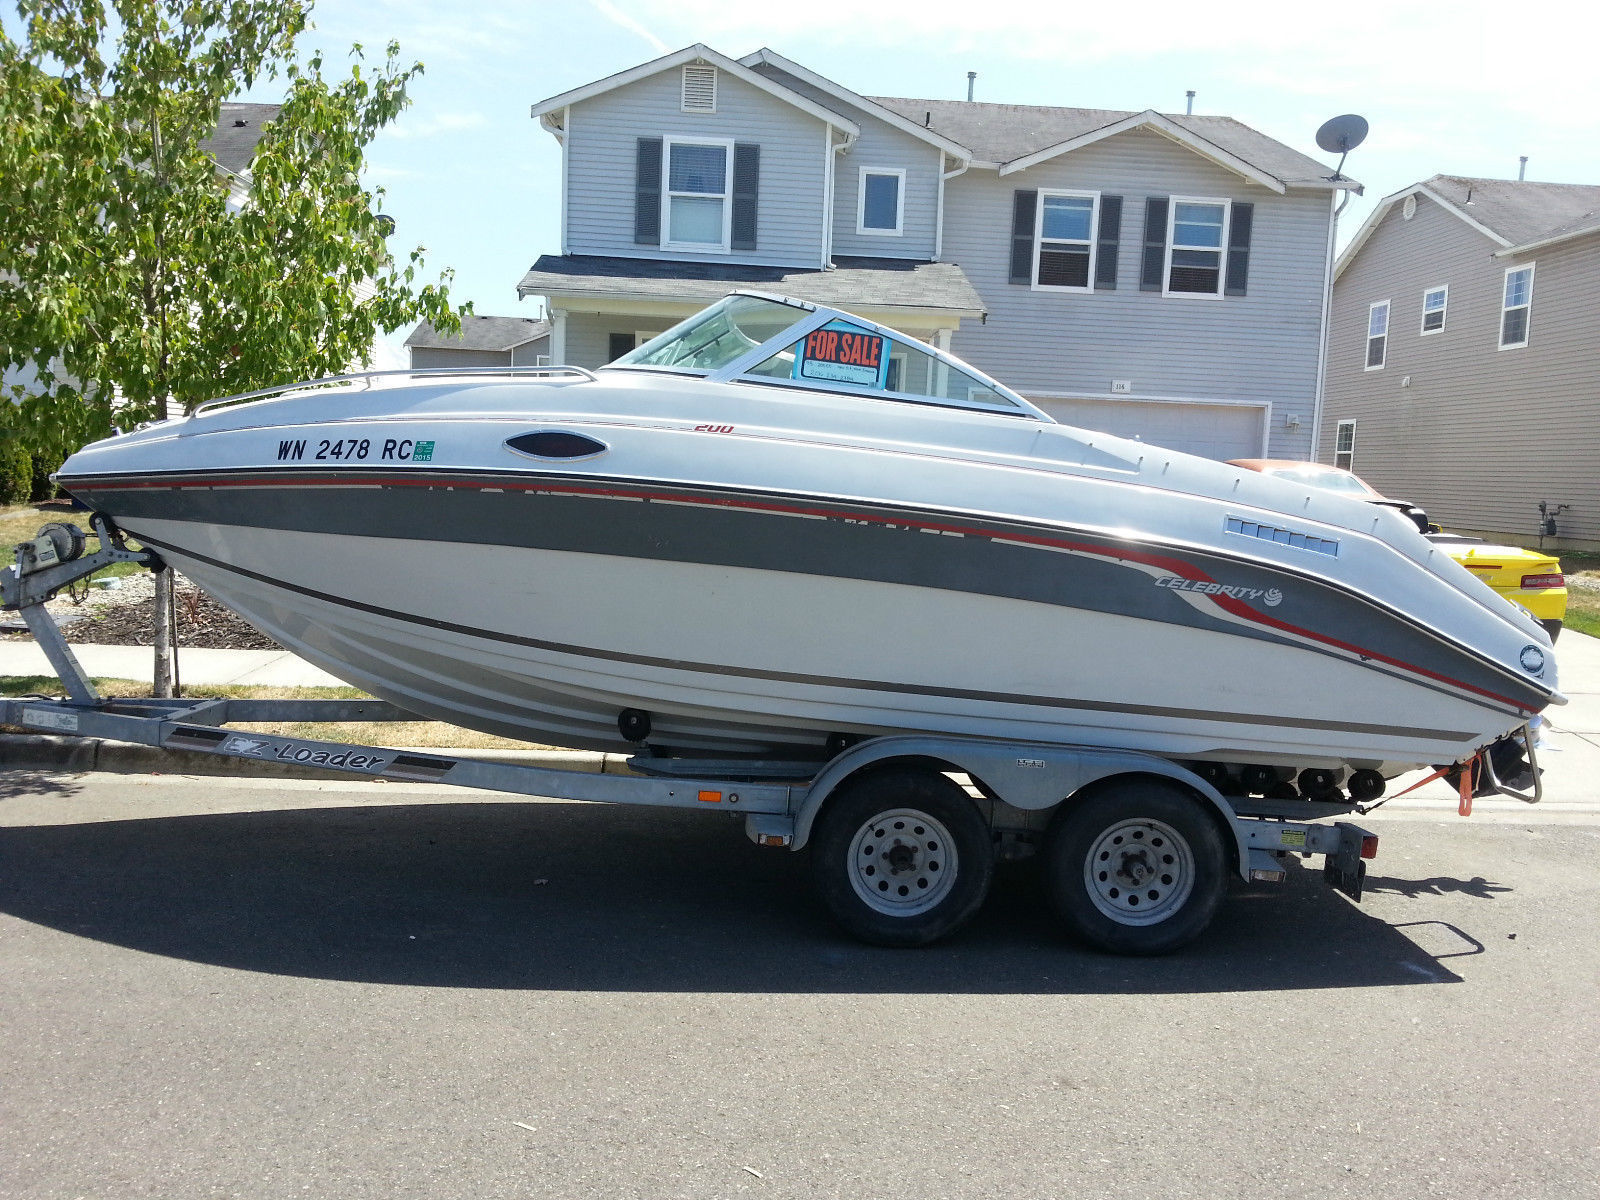 Celebrity 200cc 1993 for sale for $6,500 - Boats-from-USA.com